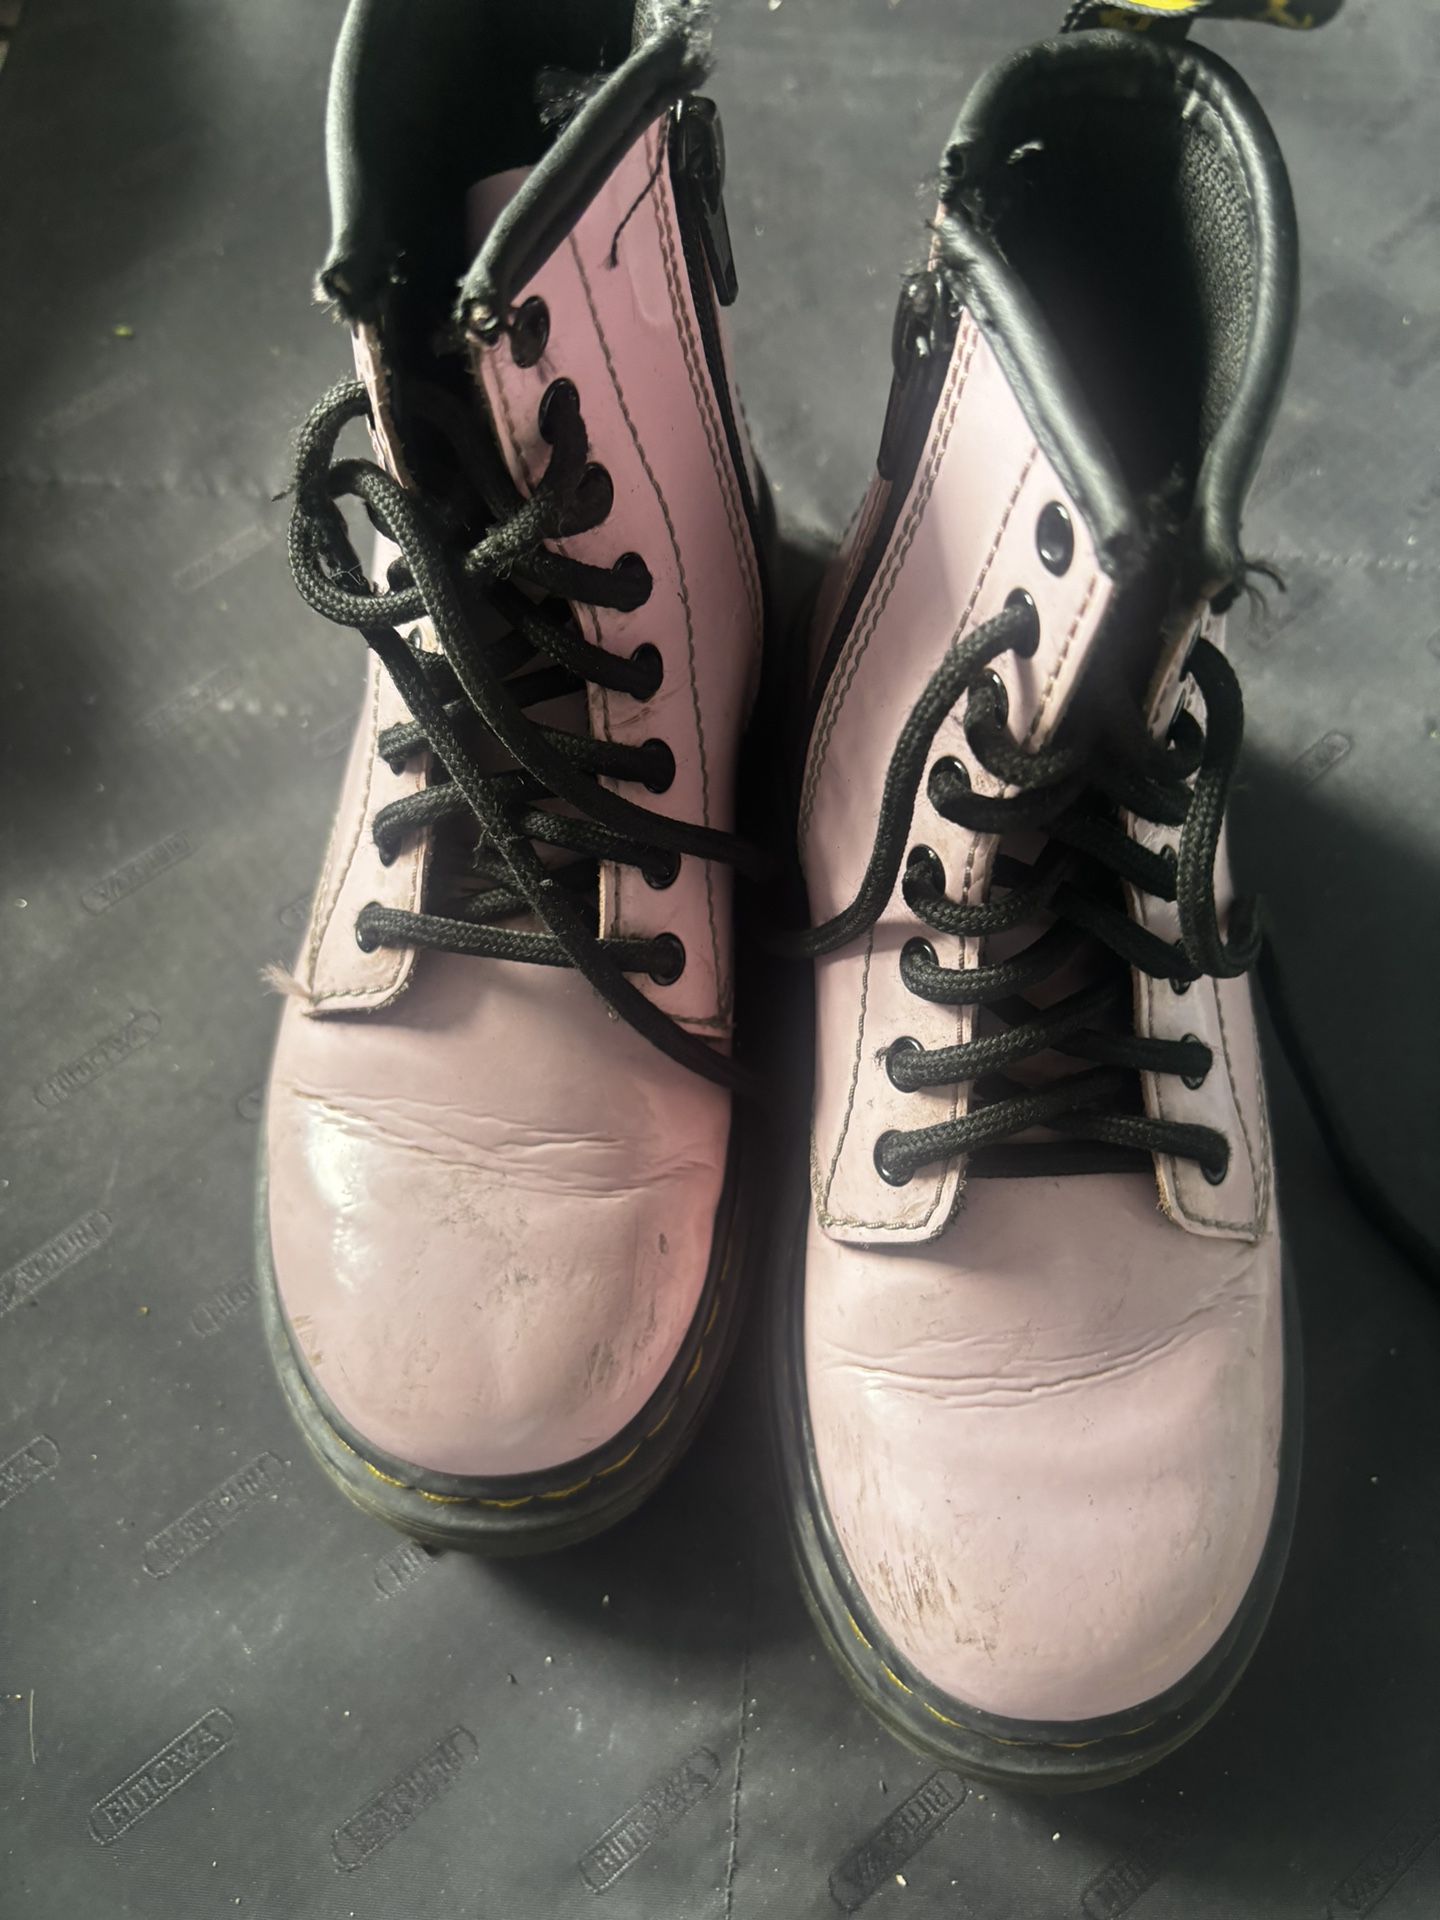 Dr Martens Boots girls pink Barbie color high top shoes cute Easter egg flats